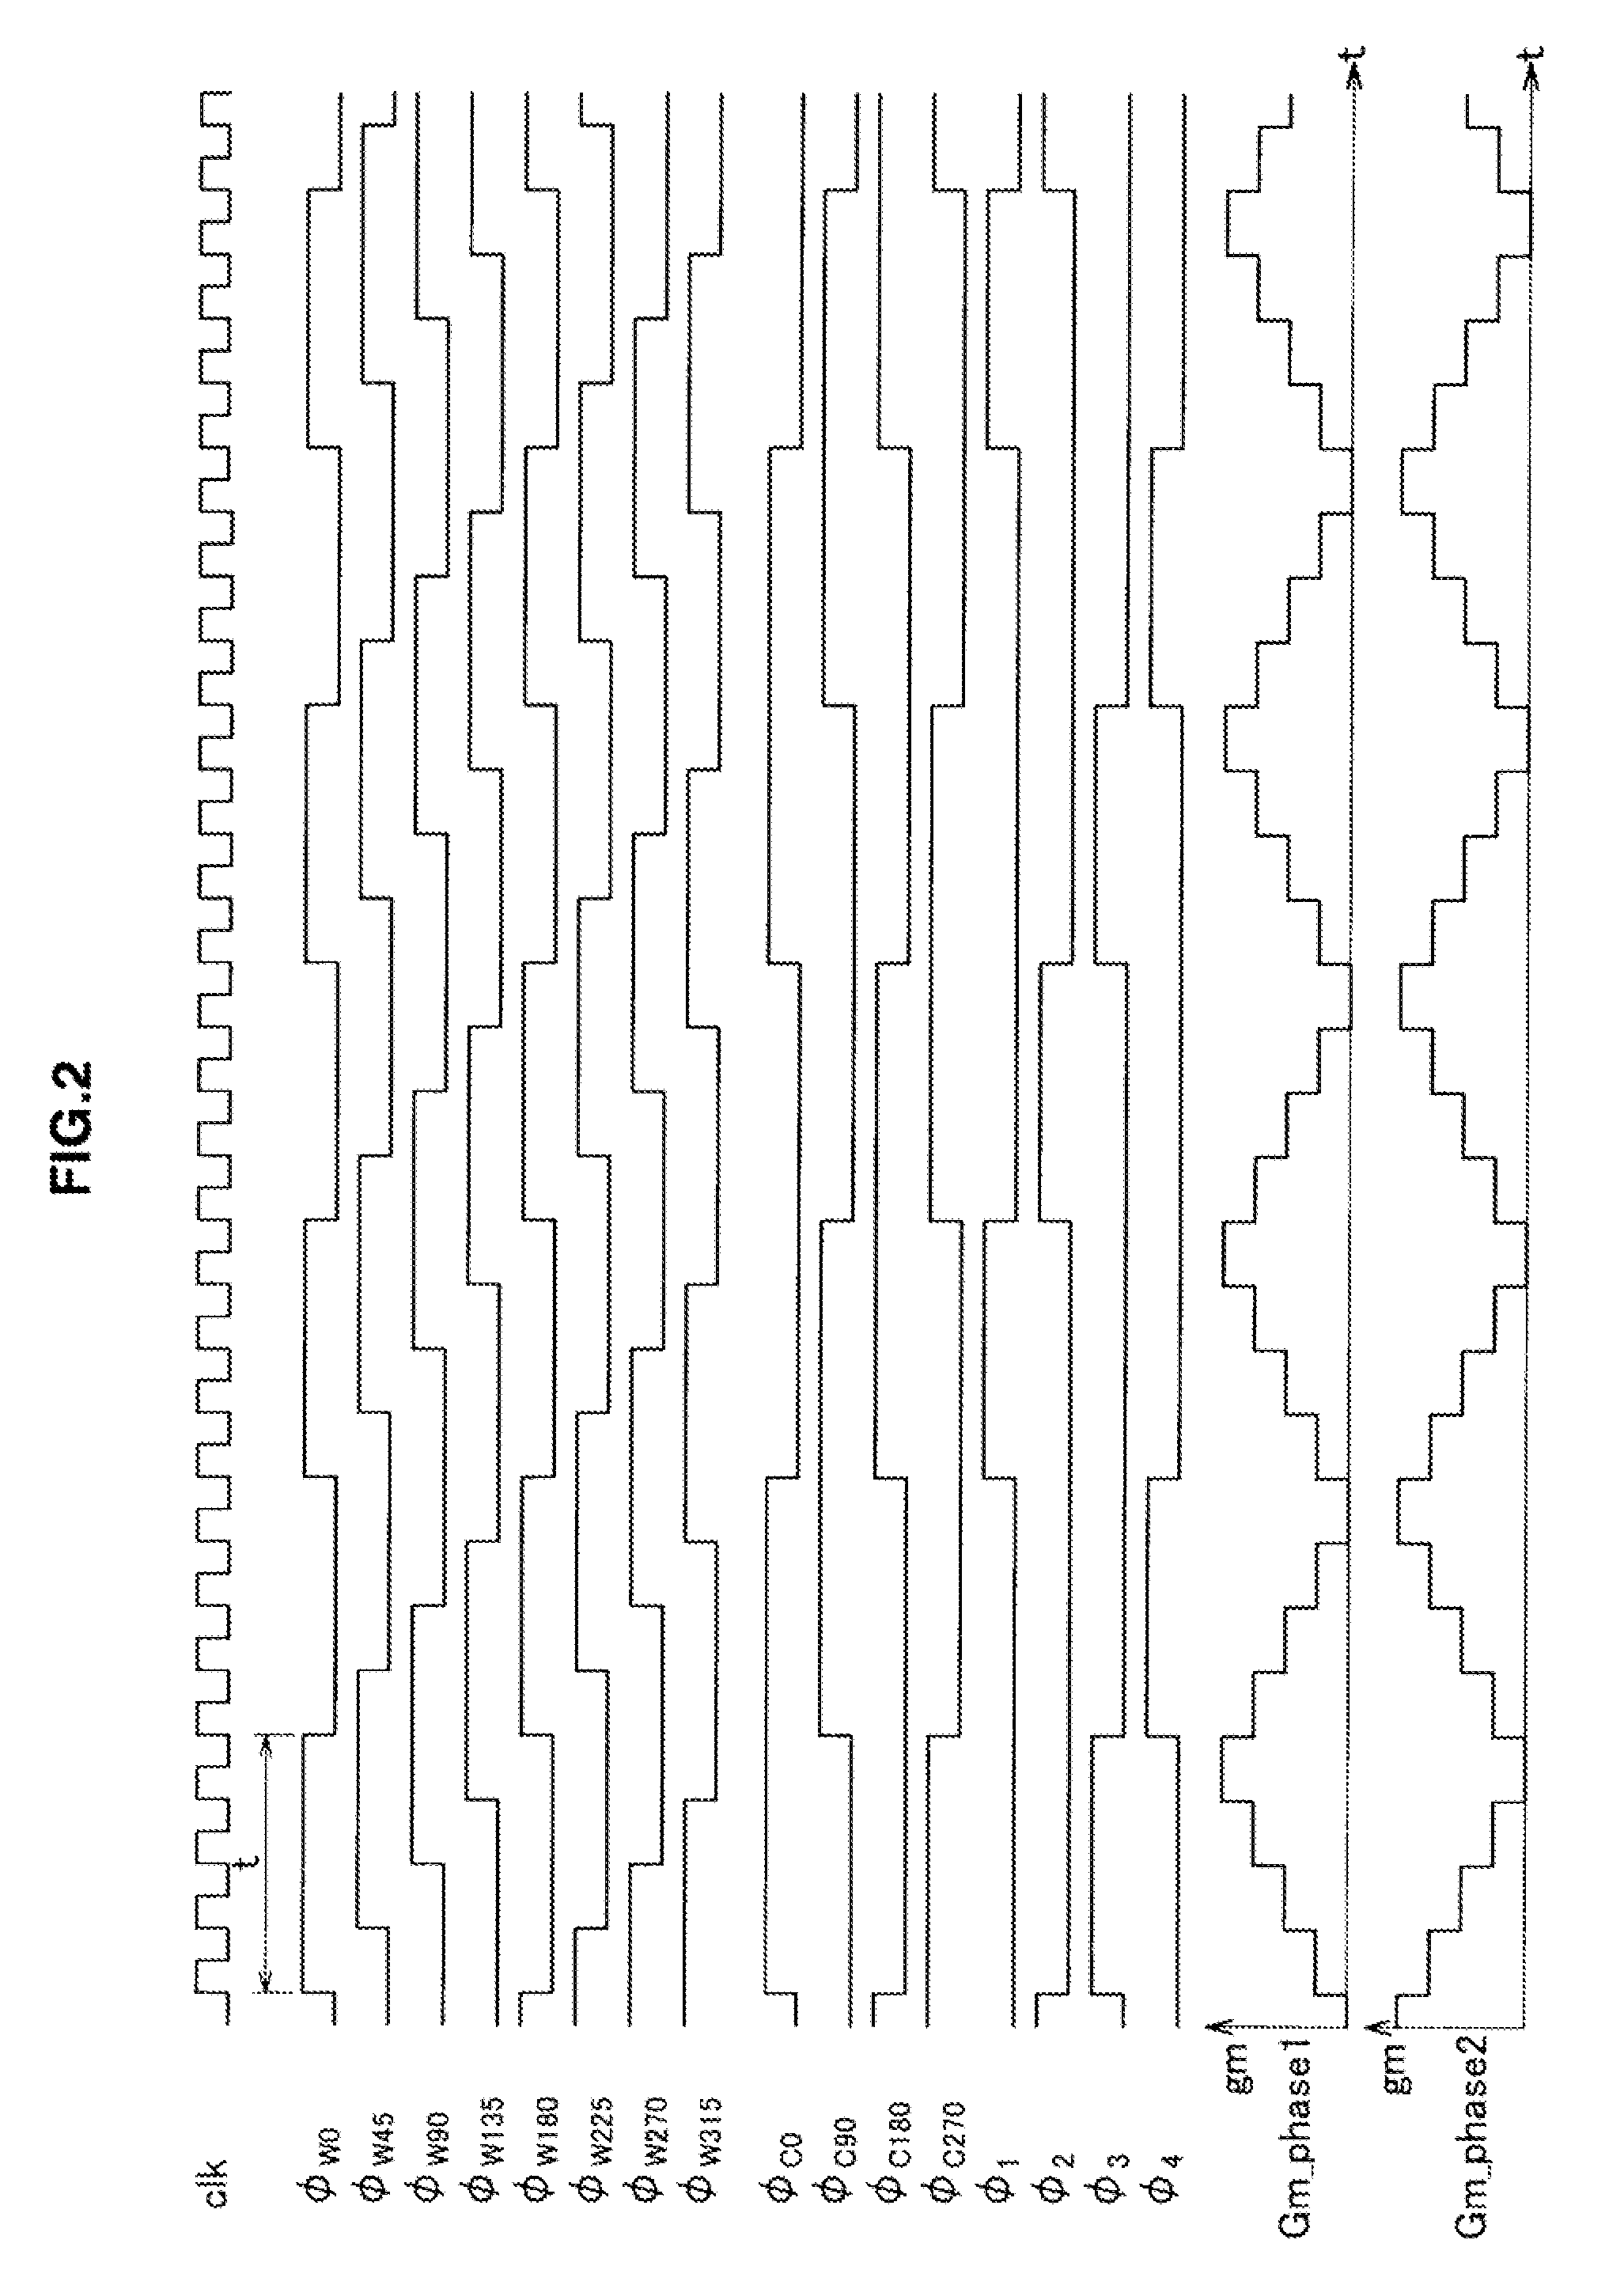 Charge domain filter device